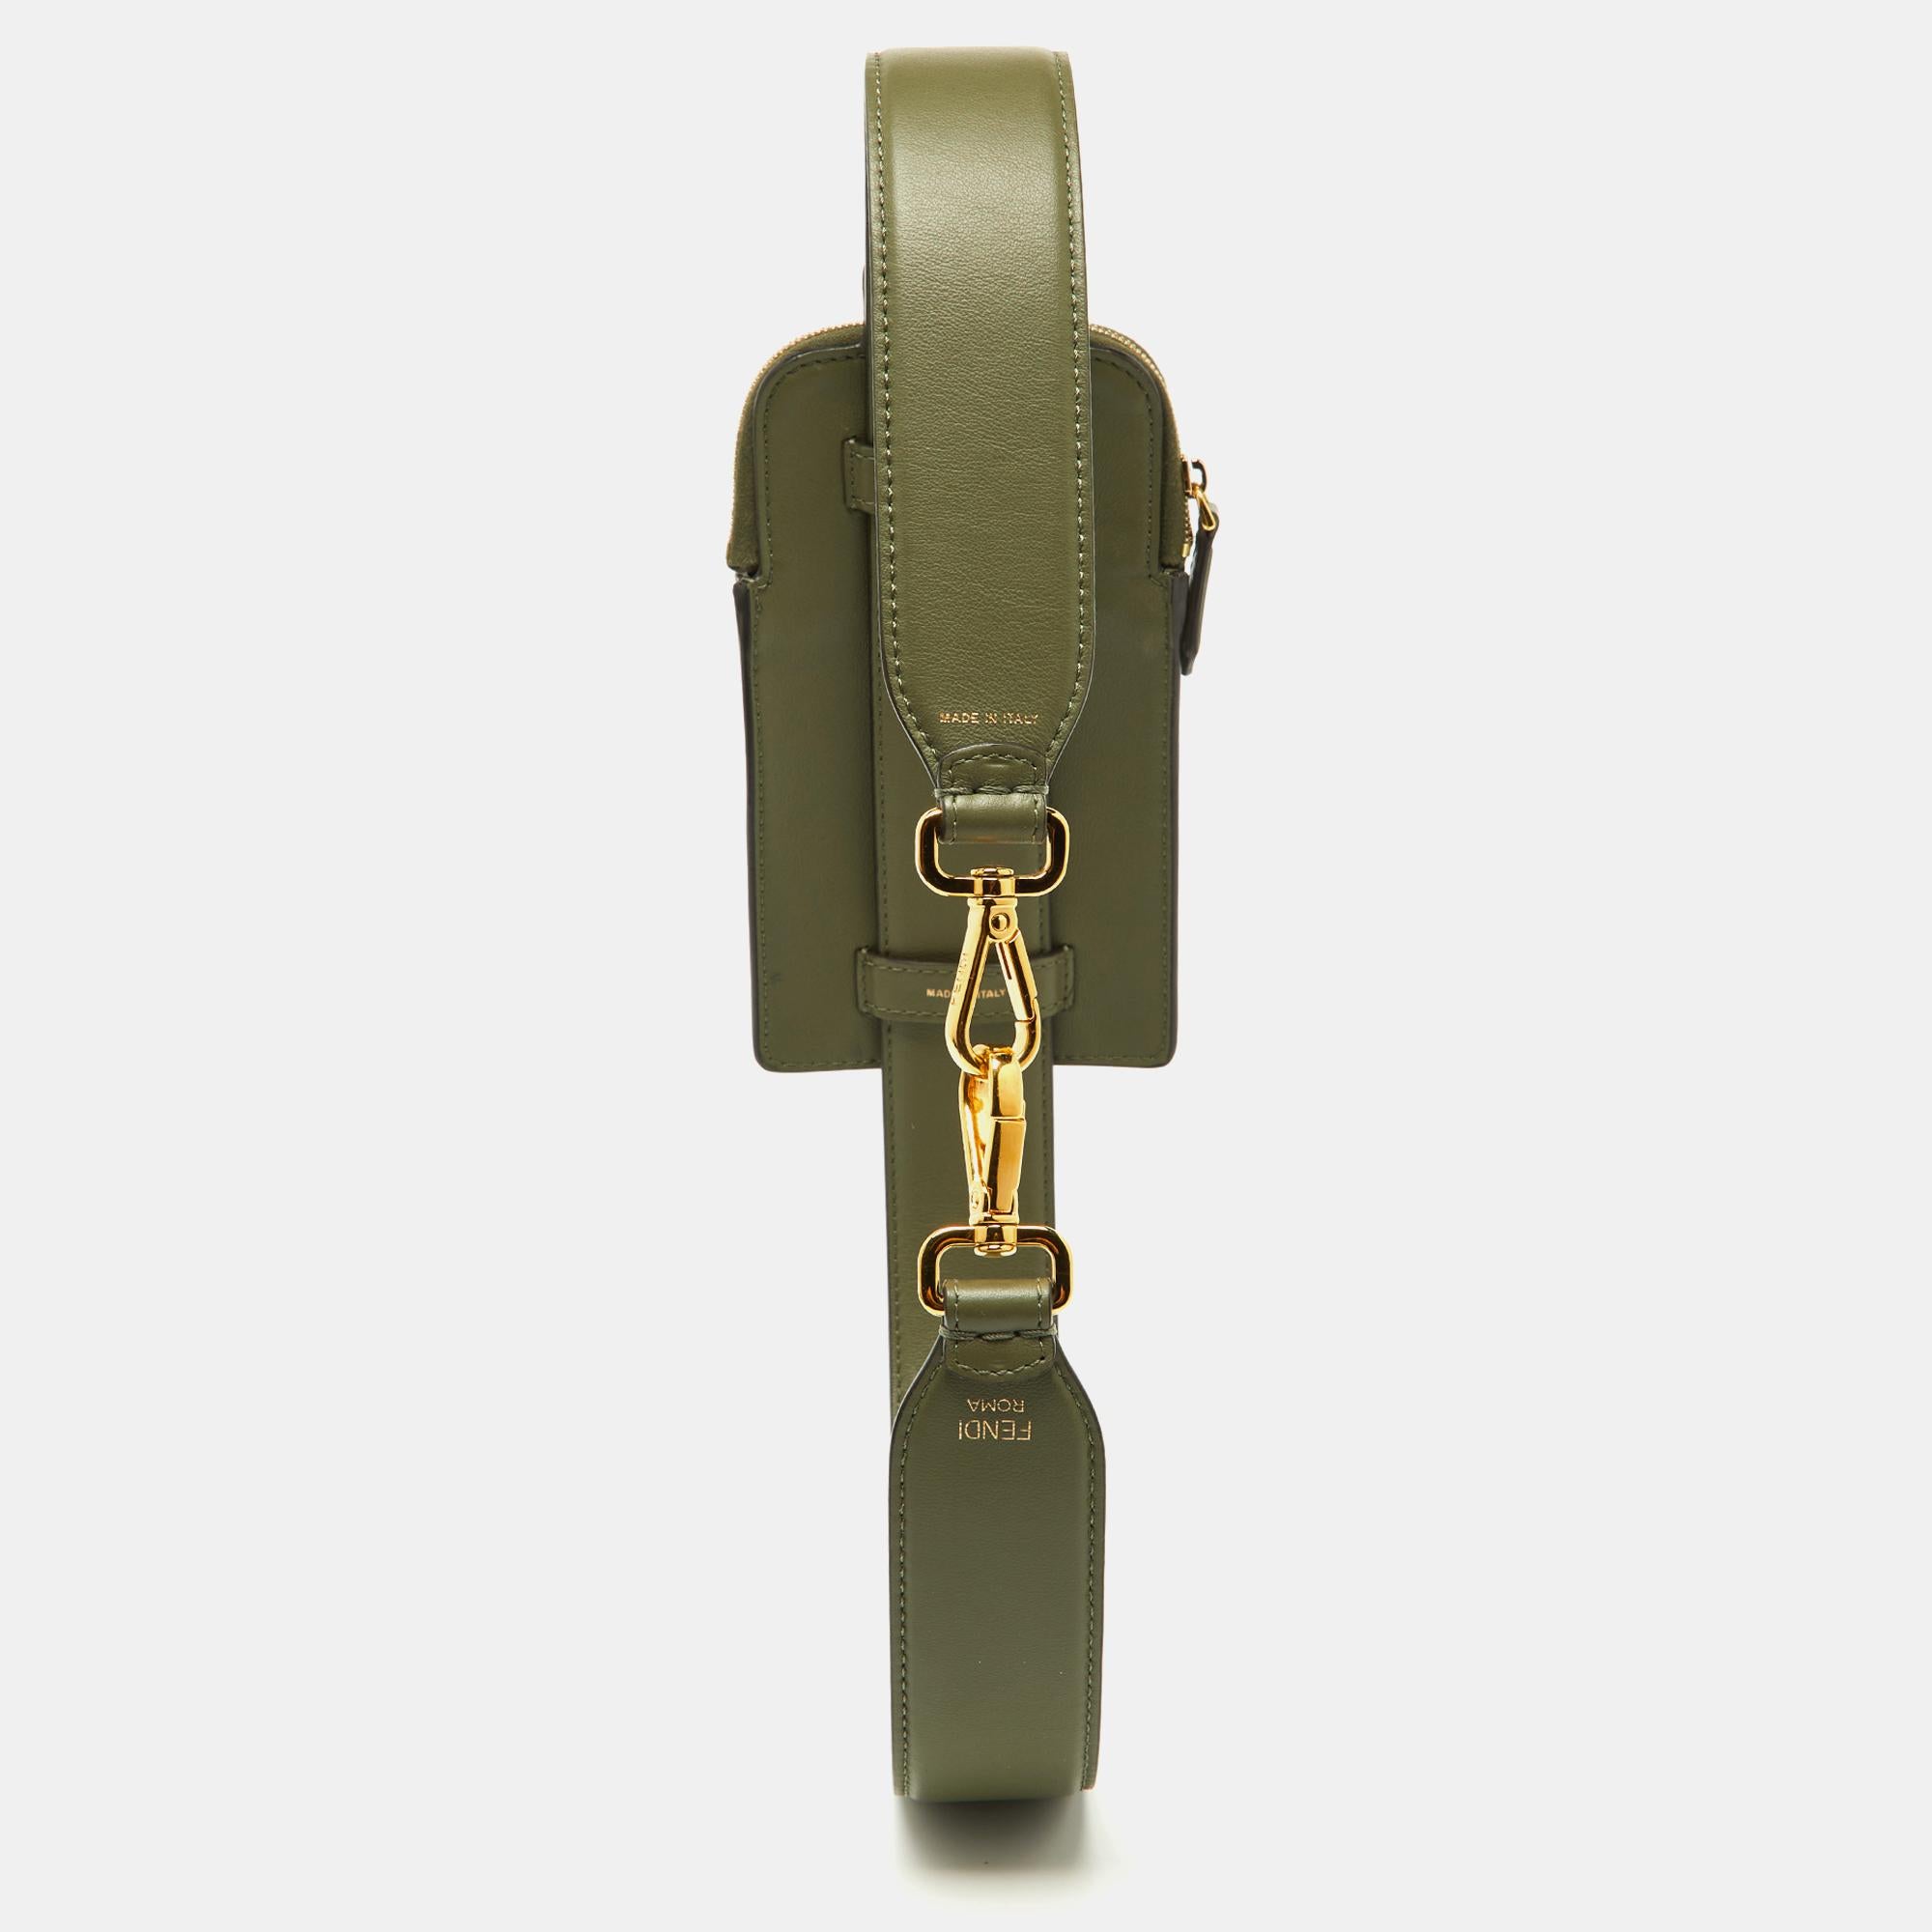 This bag strap from Fendi is a practical investment to make. It has been crafted using leather with distinct hardware. Complement your cell with this strap.

